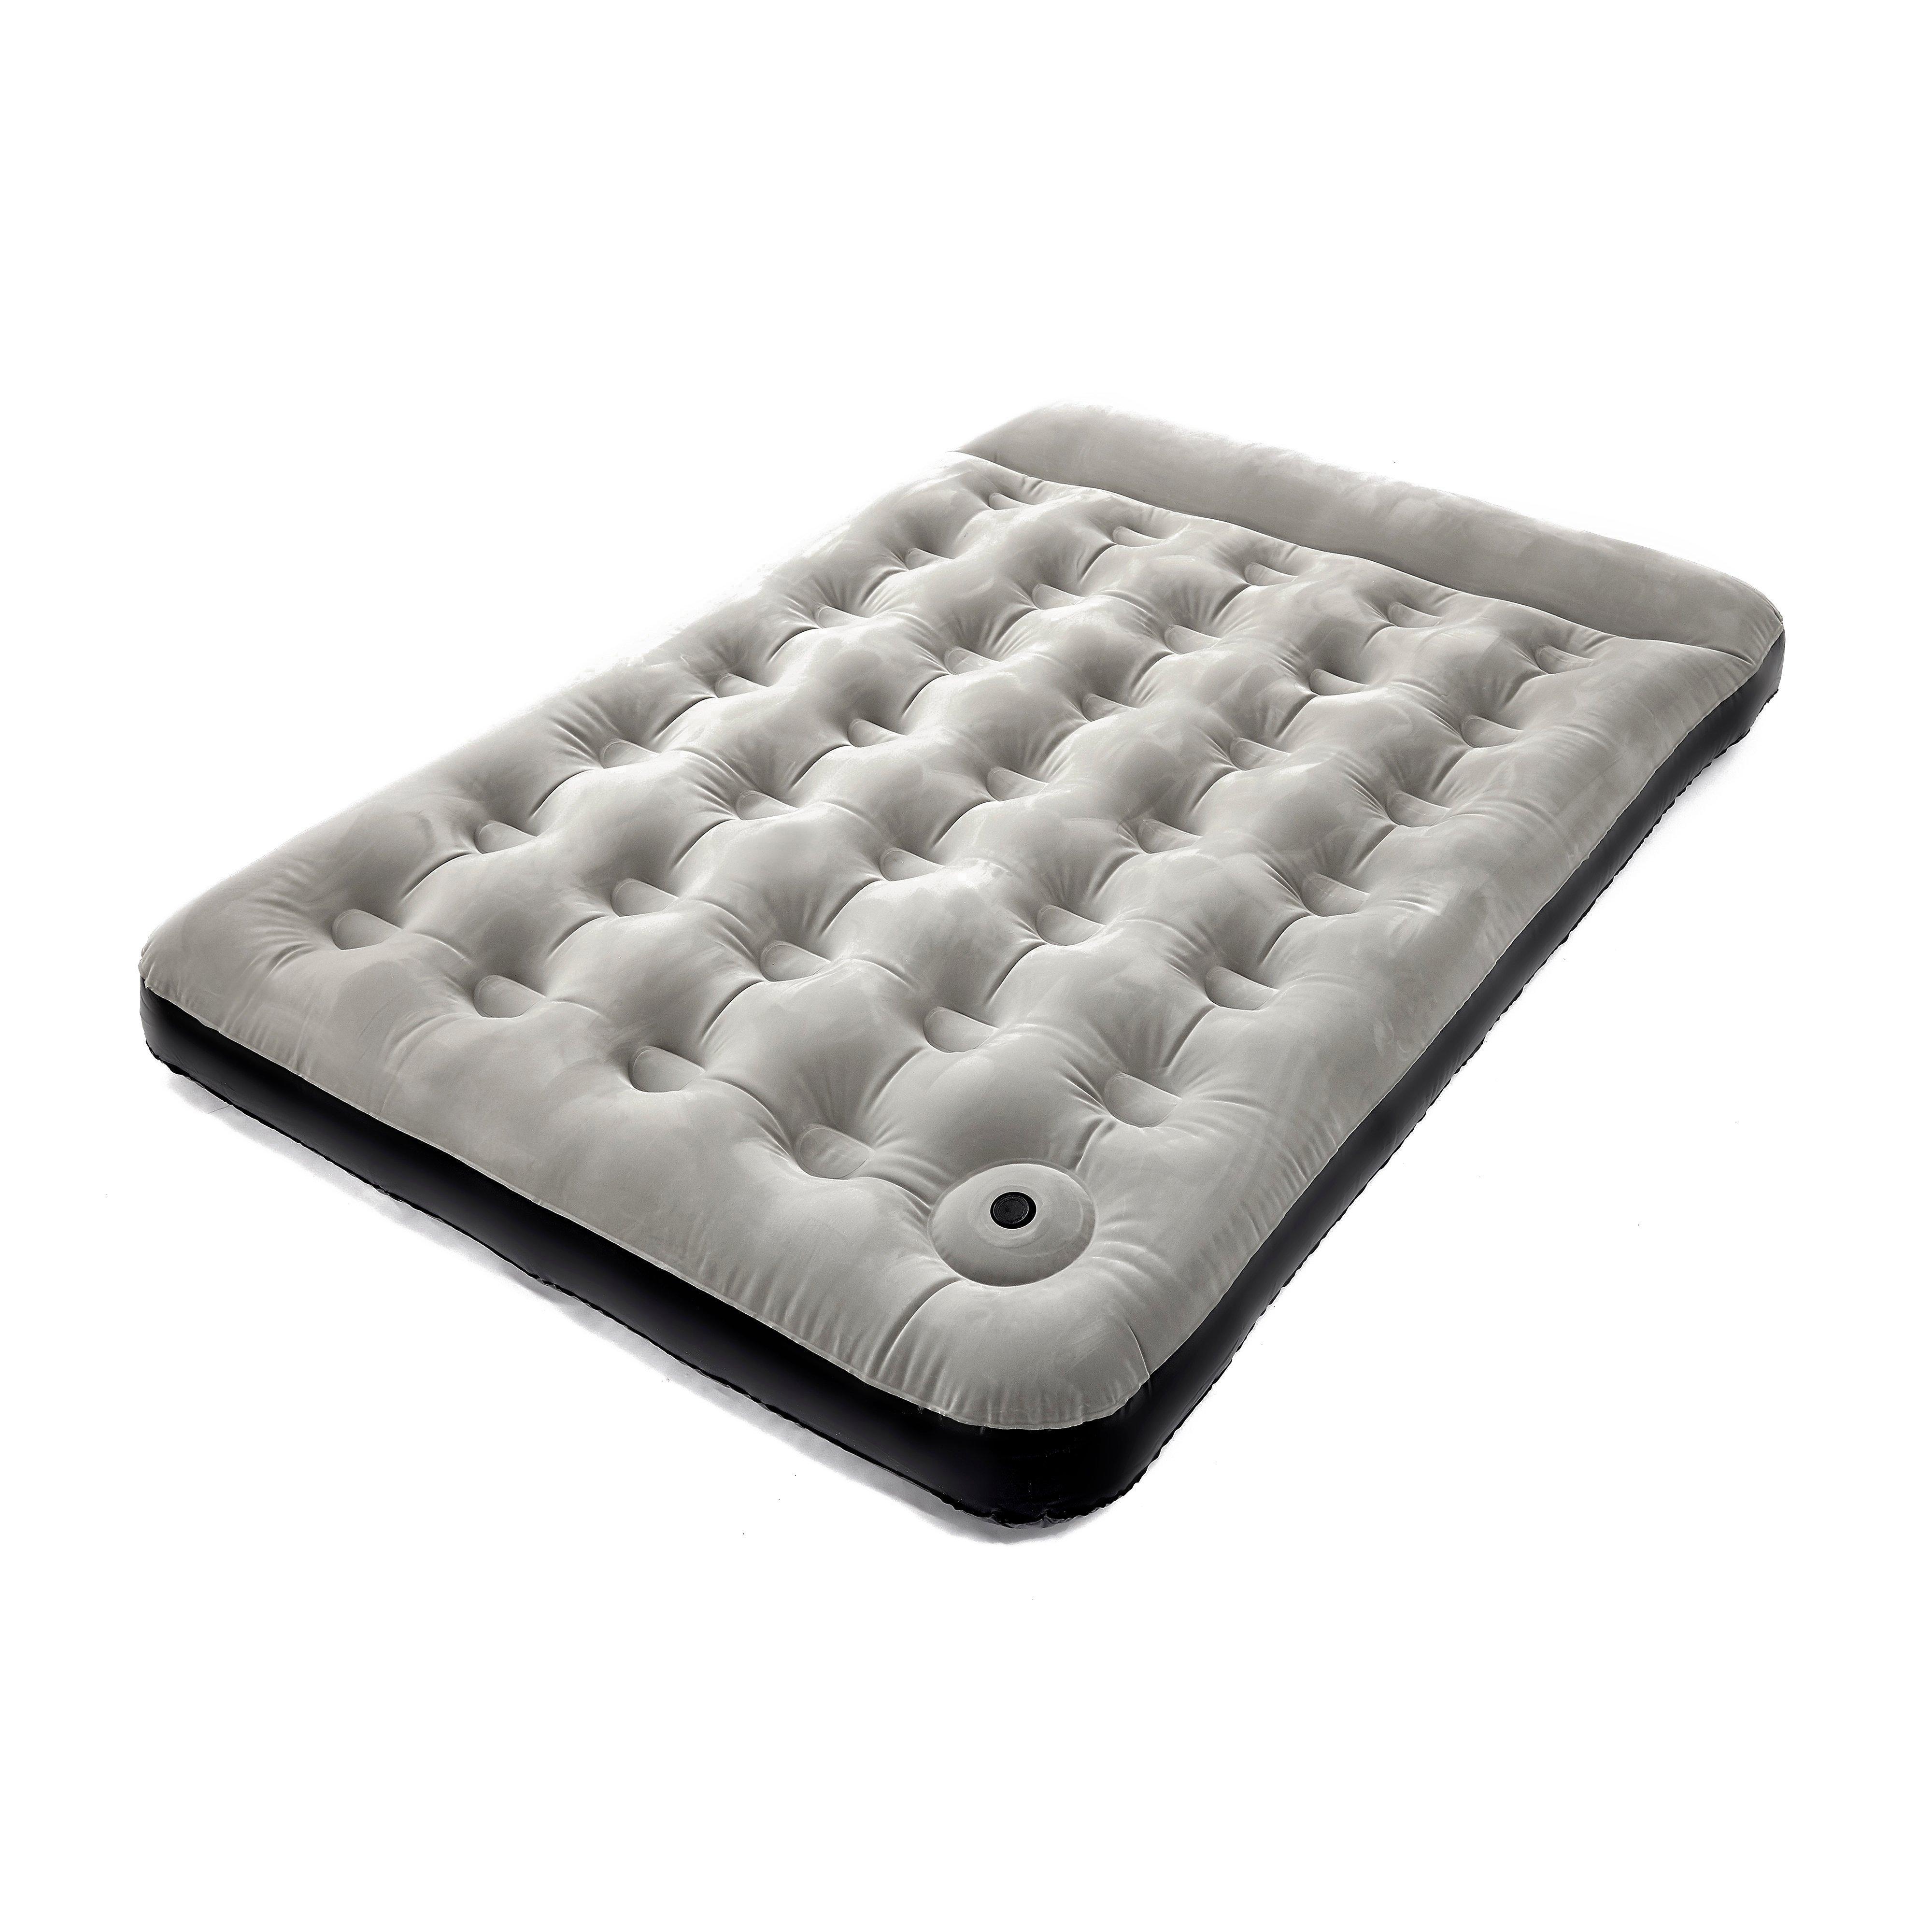 Hi-Gear Deluxe Double Airbed with Pump Review